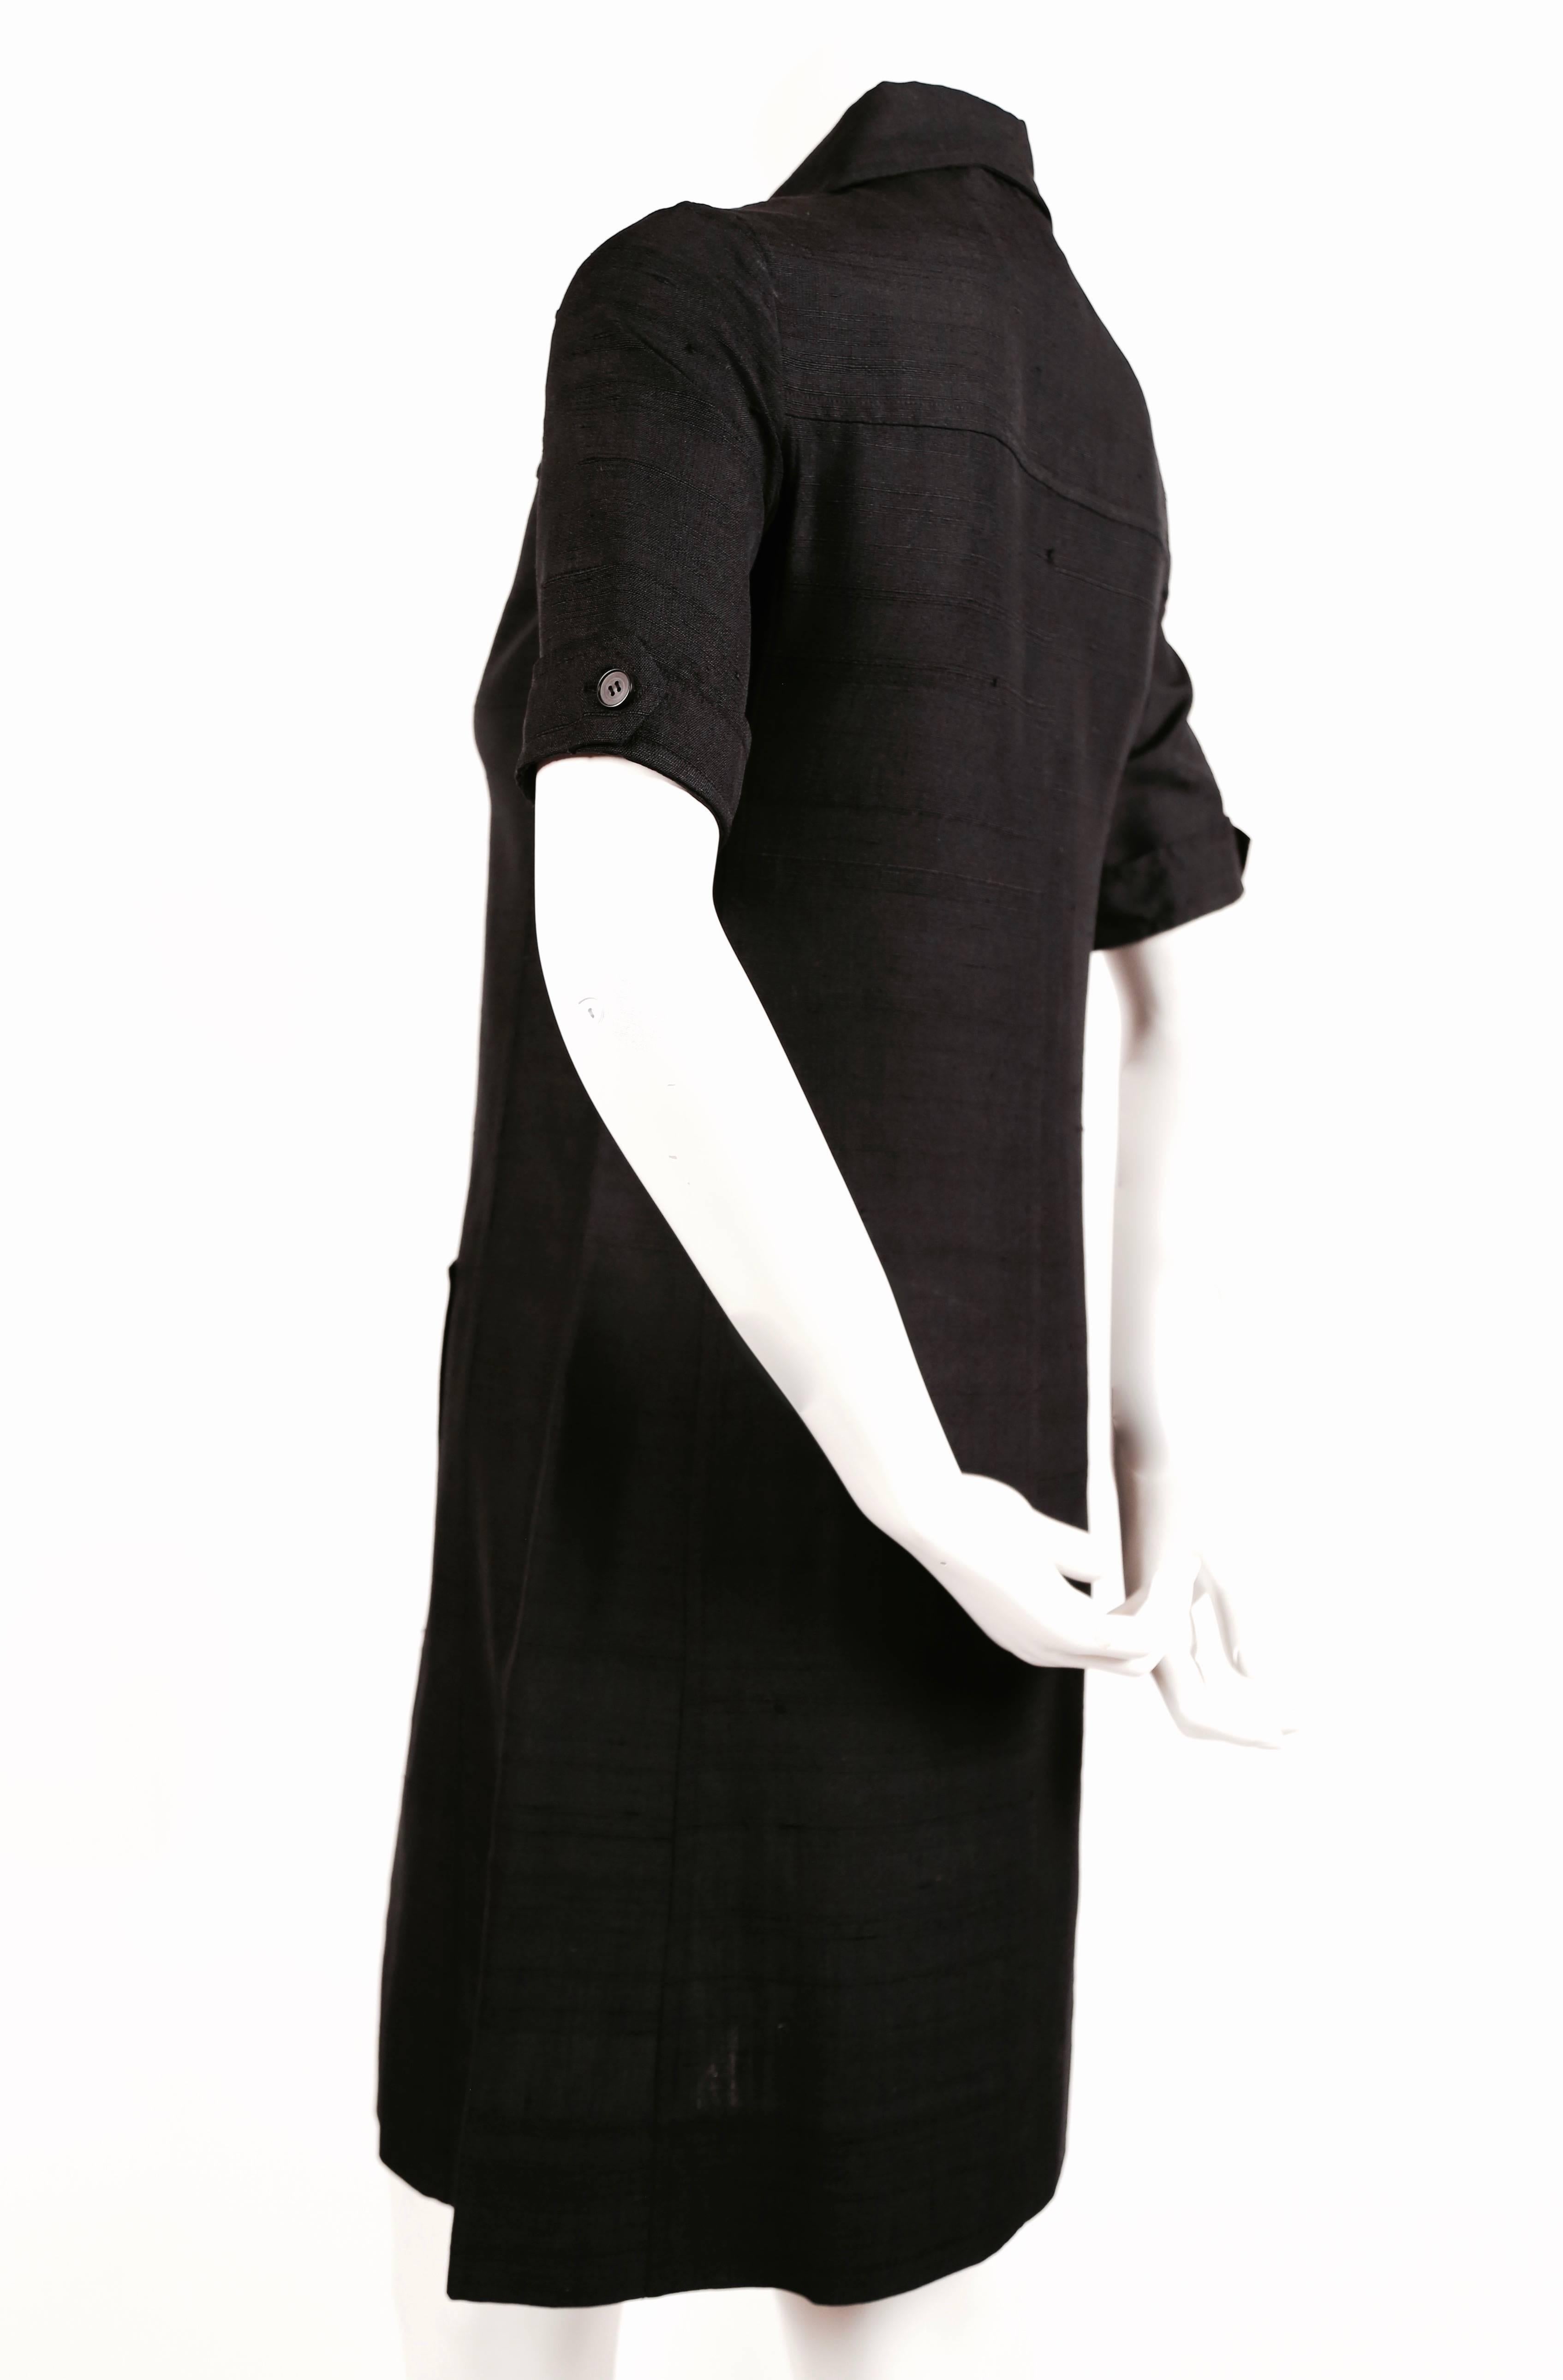 Jet black raw silk safari dress from Yves Saint Laurent dating to the 1960's. Labeled a size 34 which best fits a size 2 or 4. Approximate measurements: 14